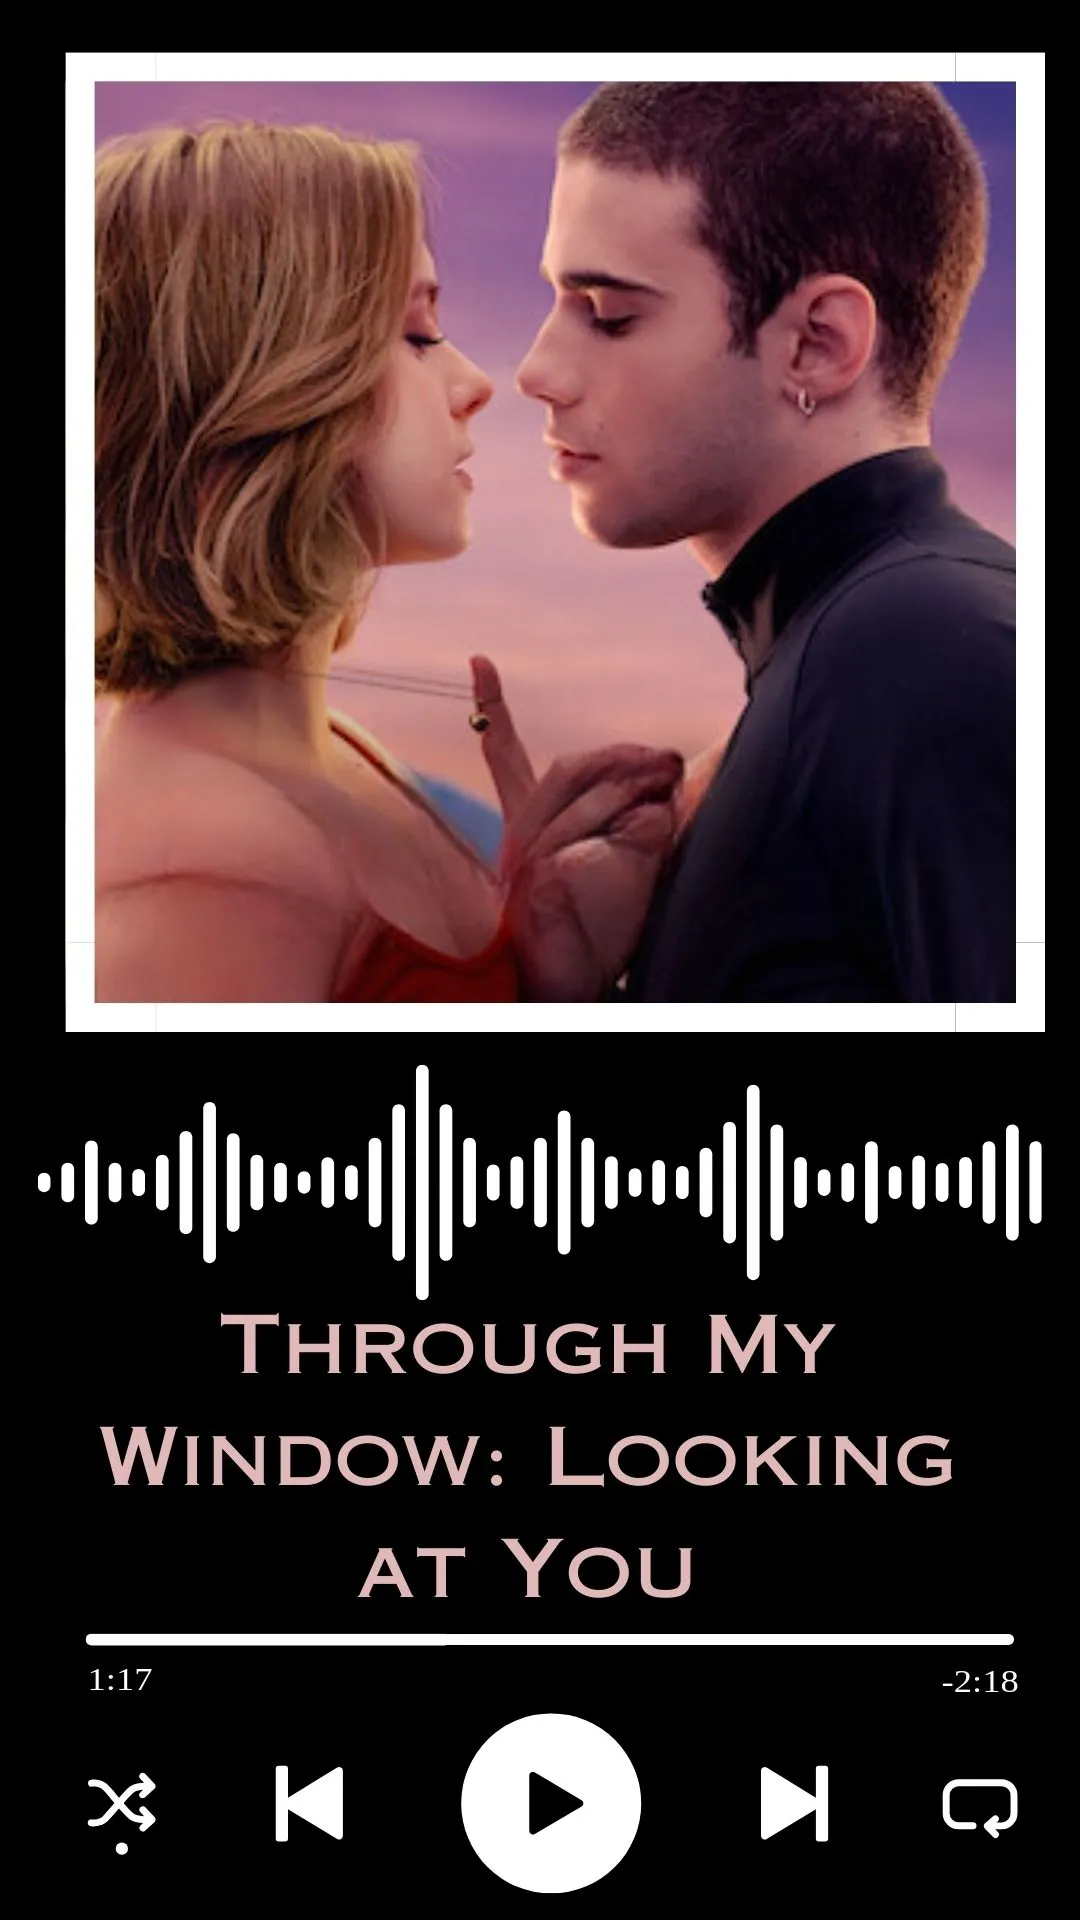 Through My Window: Looking at You Soundtrack